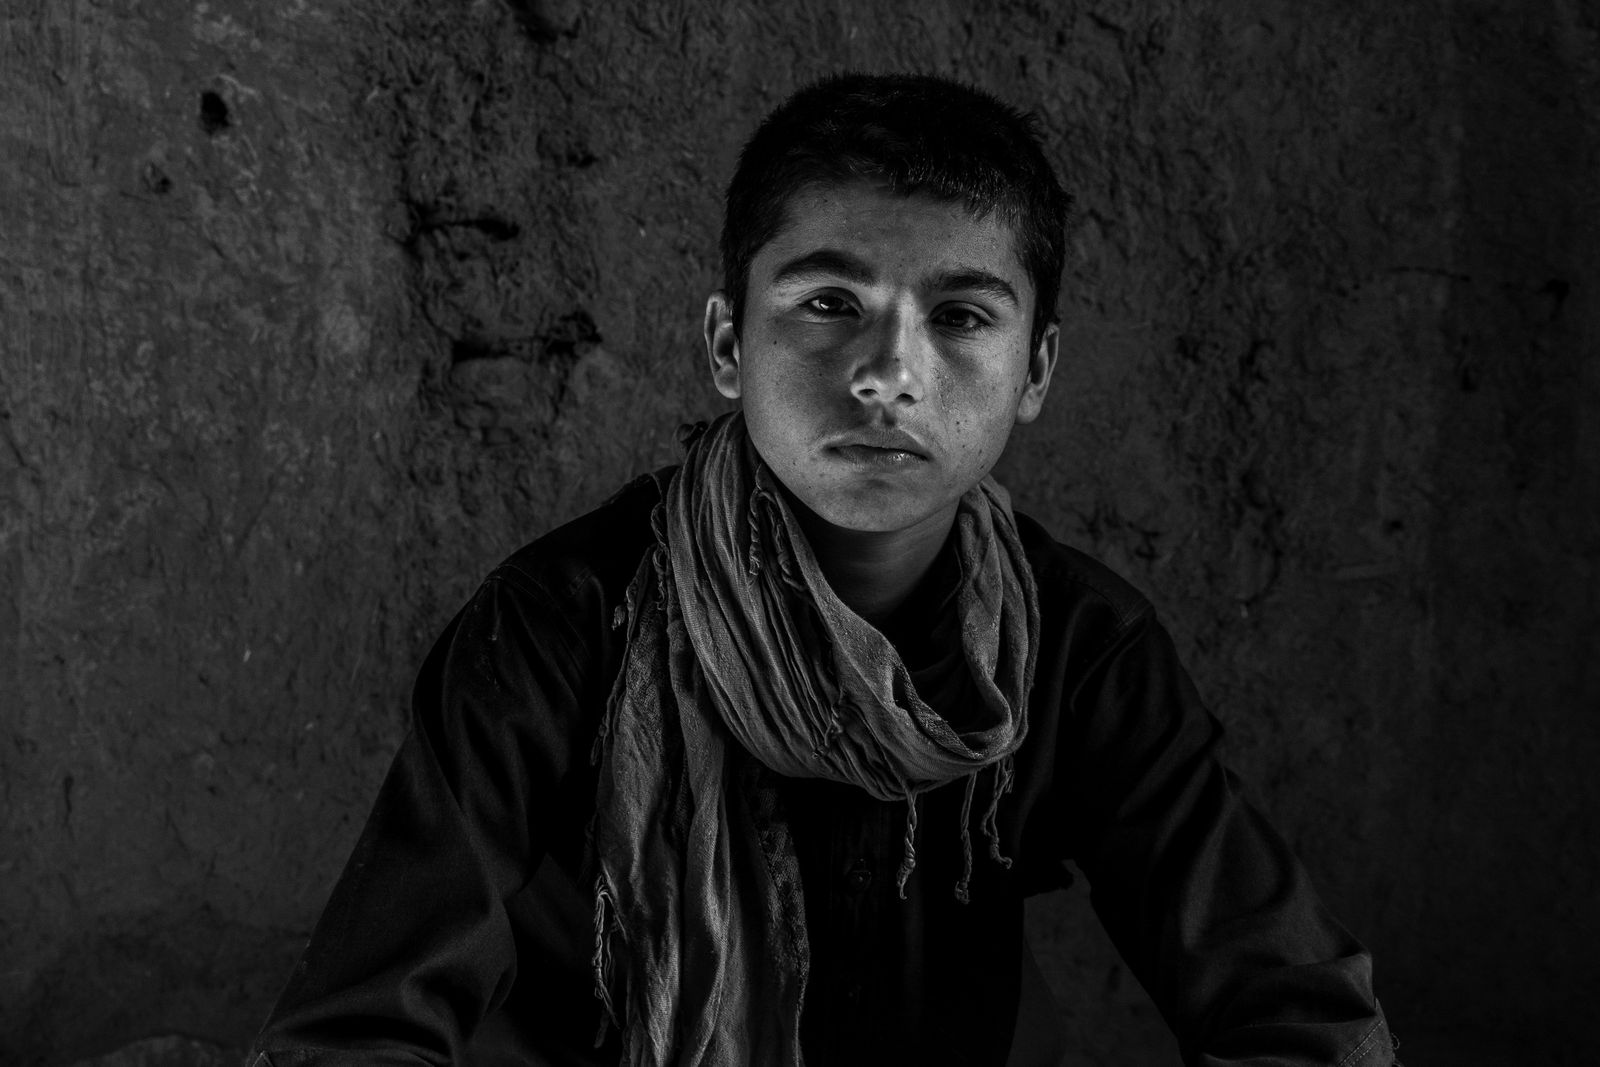 © Zobair Movahhed - A young Afghan refugee, after having recently crossed the border into Iran.